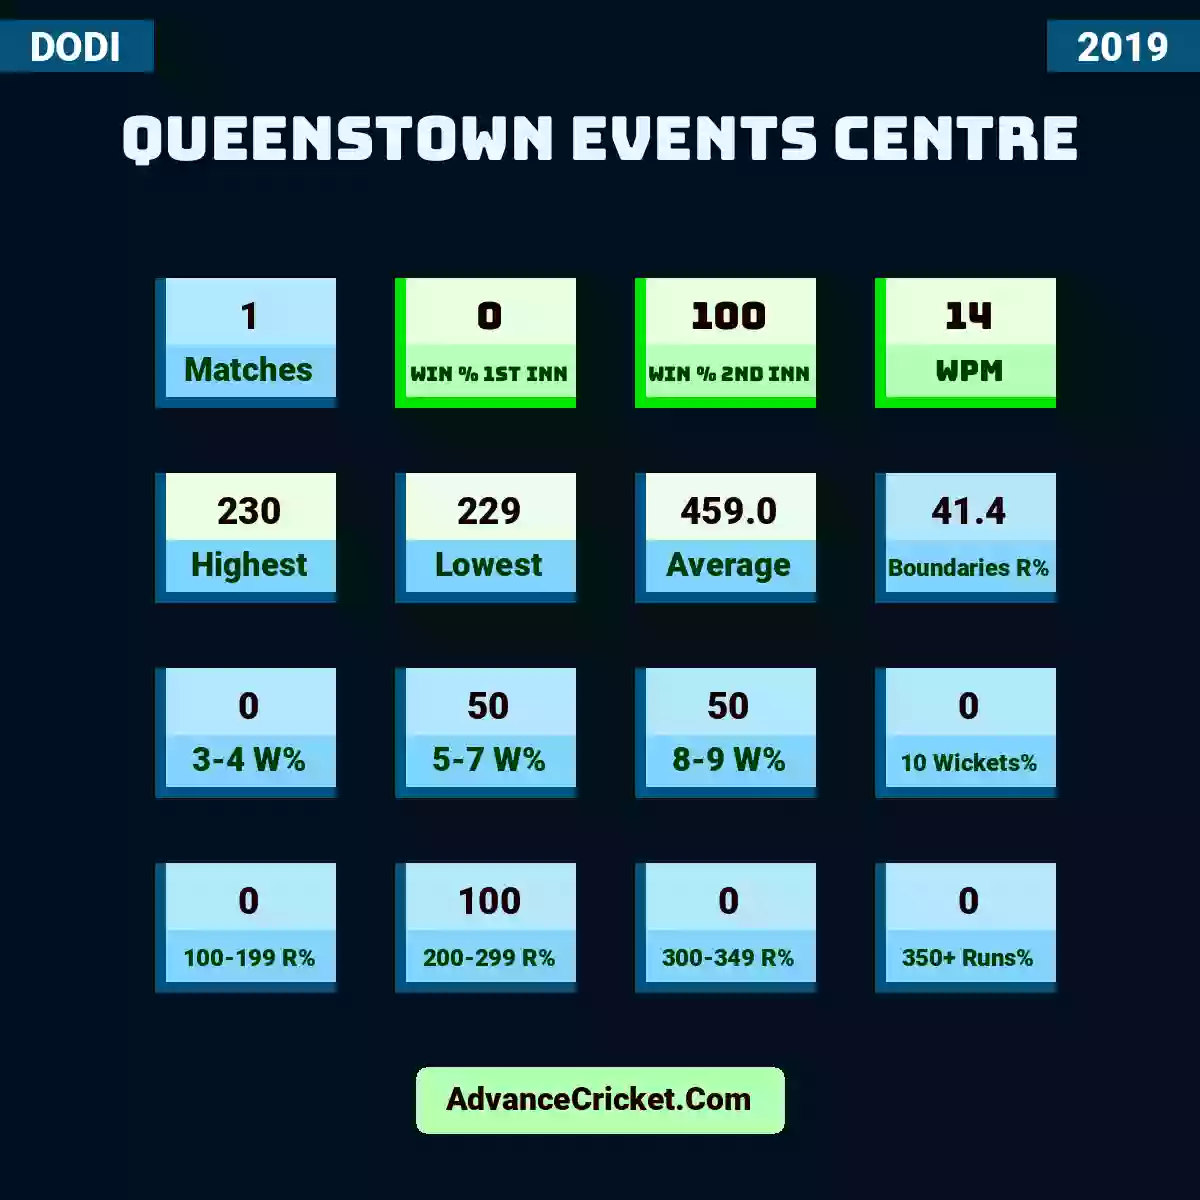 Image showing Queenstown Events Centre with Matches: 1, Win % 1st Inn: 0, Win % 2nd Inn: 100, WPM: 14, Highest: 230, Lowest: 229, Average: 459.0, Boundaries R%: 41.4, 3-4 W%: 0, 5-7 W%: 50, 8-9 W%: 50, 10 Wickets%: 0, 100-199 R%: 0, 200-299 R%: 100, 300-349 R%: 0, 350+ Runs%: 0.